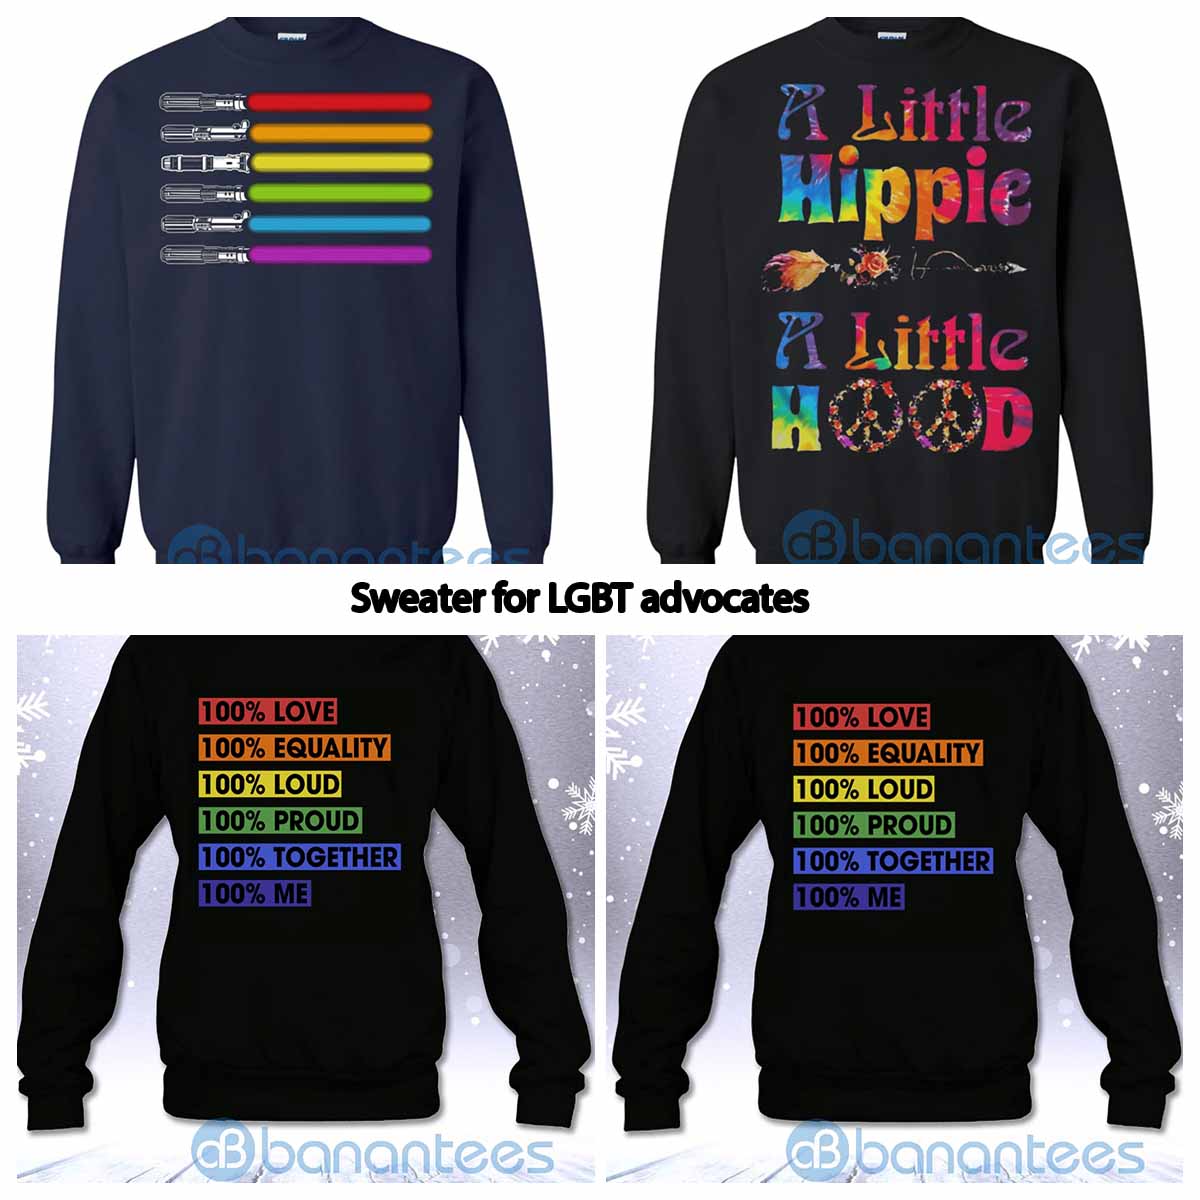 Sweater for LGBT advocates